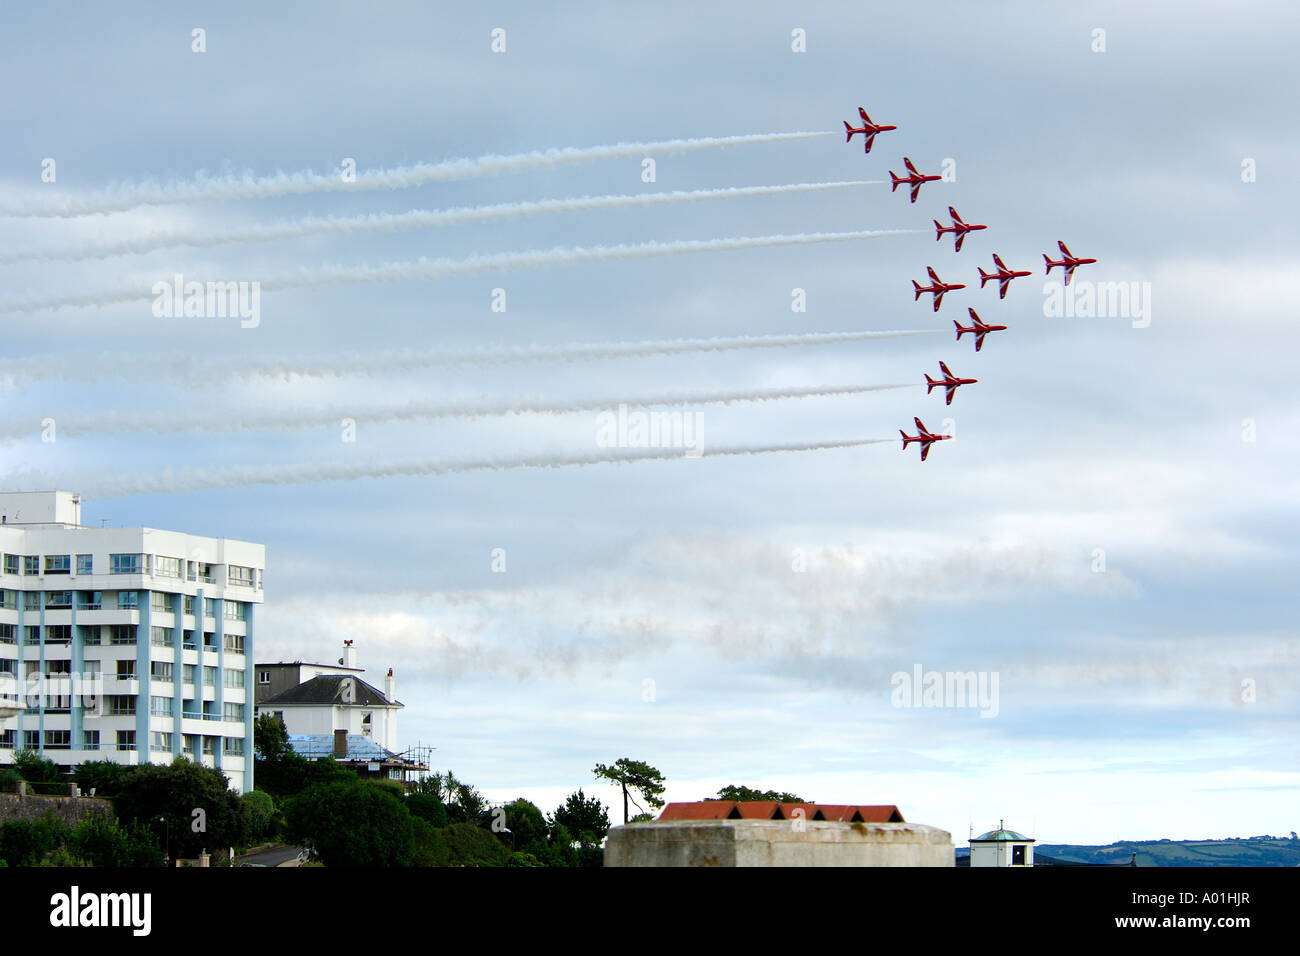 Royal Air Force Red Arrow aerobatic display over Torquay harbour with overcast weather conditions August 2006 Stock Photo